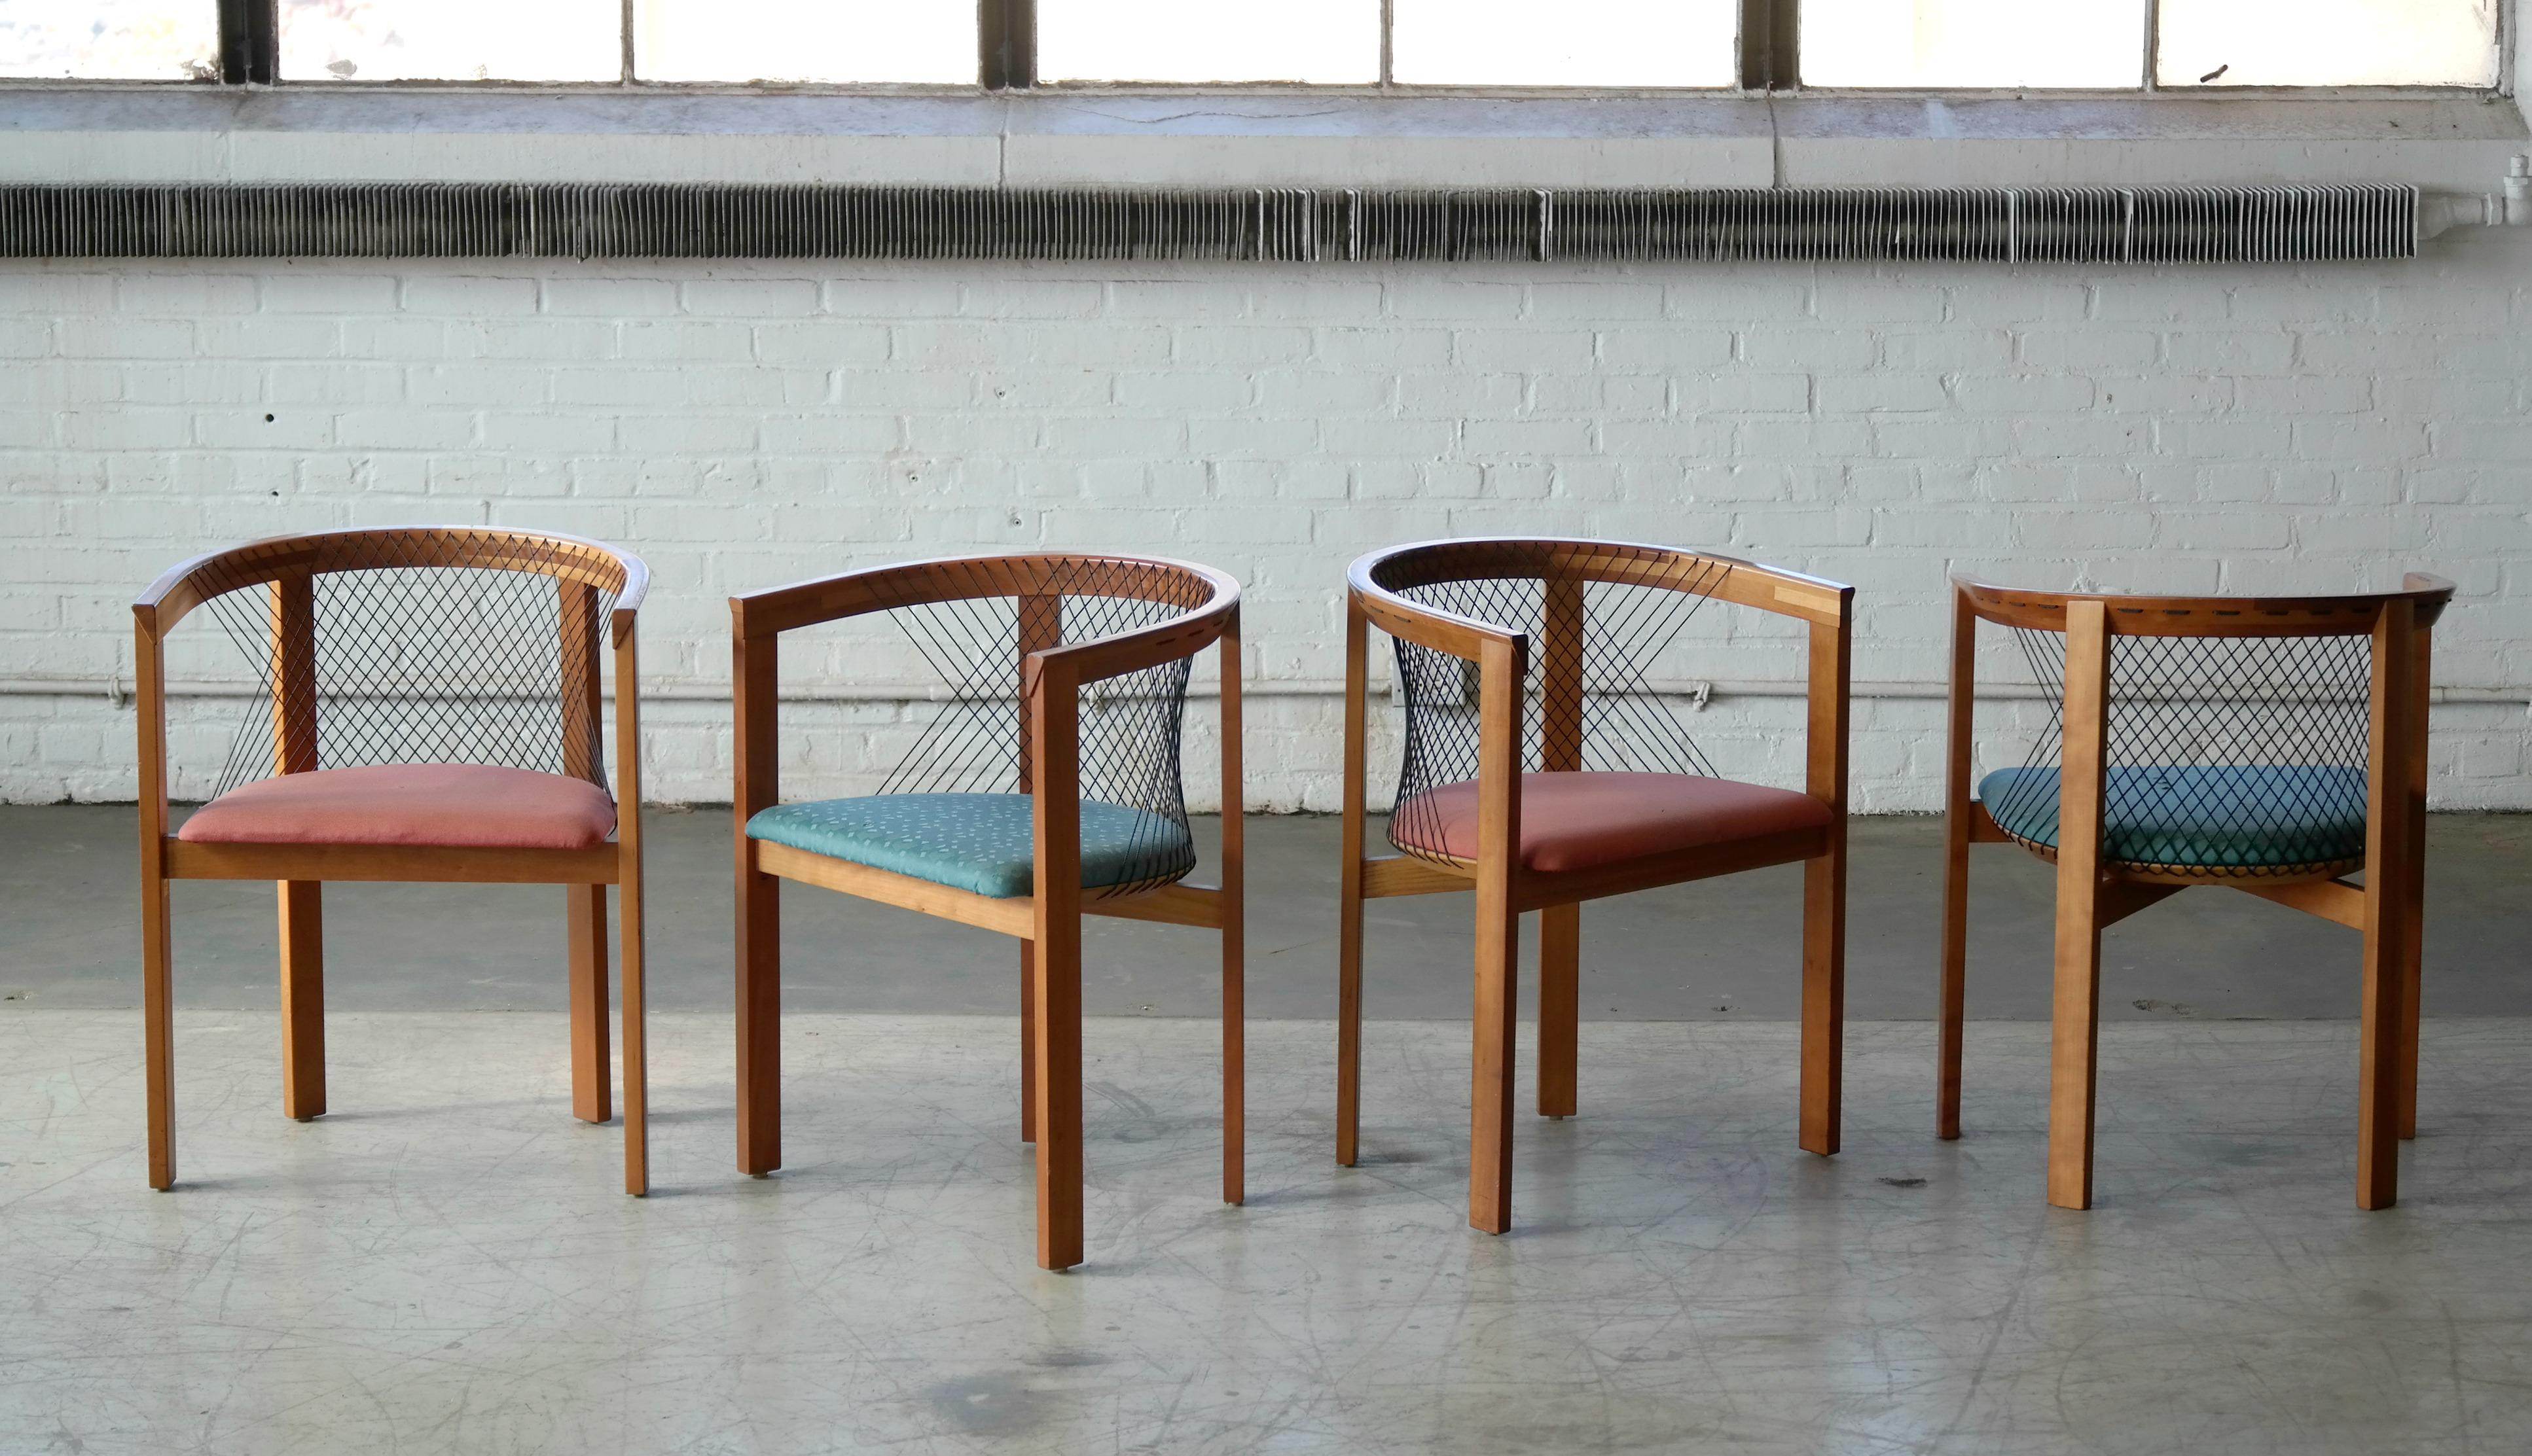 Set of four stunning sculptural string chairs designed by Niels Jørgen Haugesen for Tranekær Furniture Denmark, circa 1980. Each chair features angular wood frames in satin-finished cherrywood. The minimal, post modernist style frame is complemented